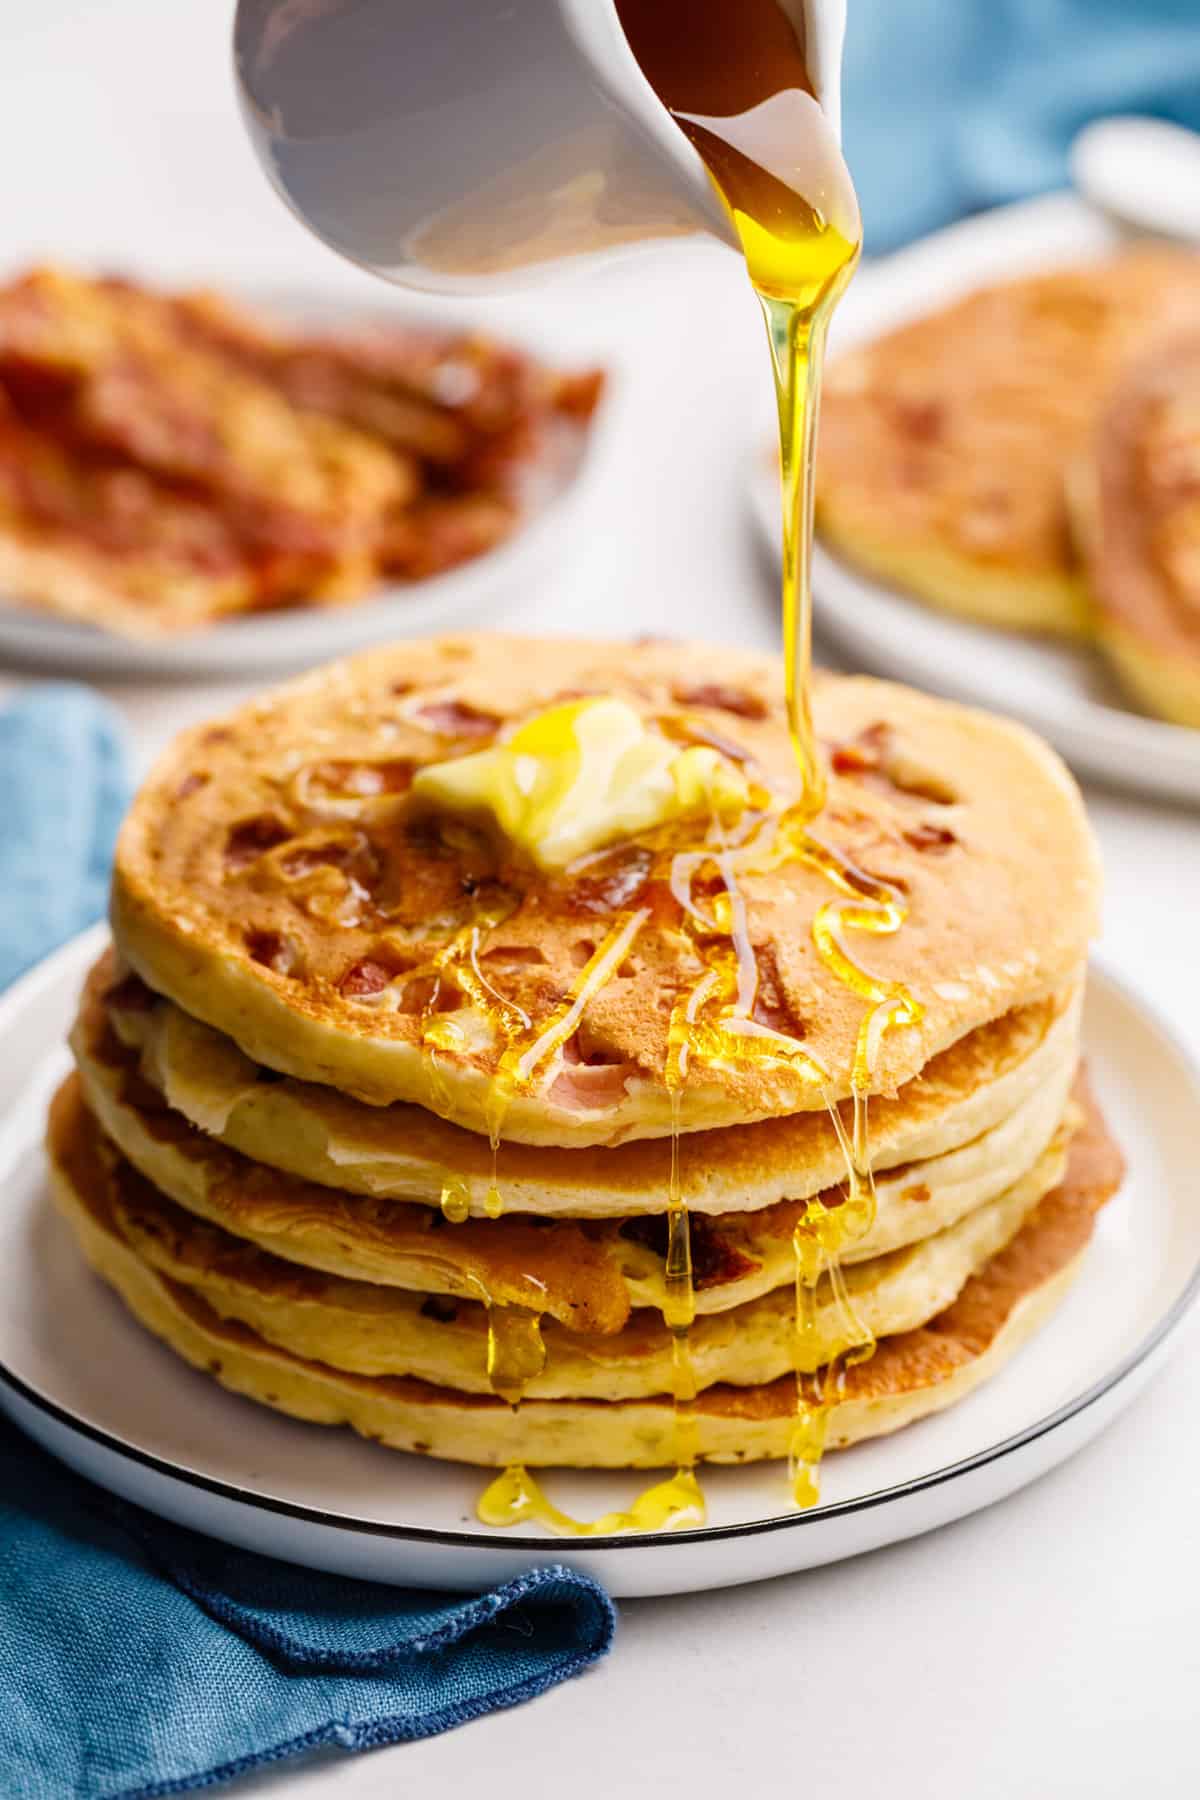 maple syrup being pour on top of a stack of five bacon pancakes served on a white round plate